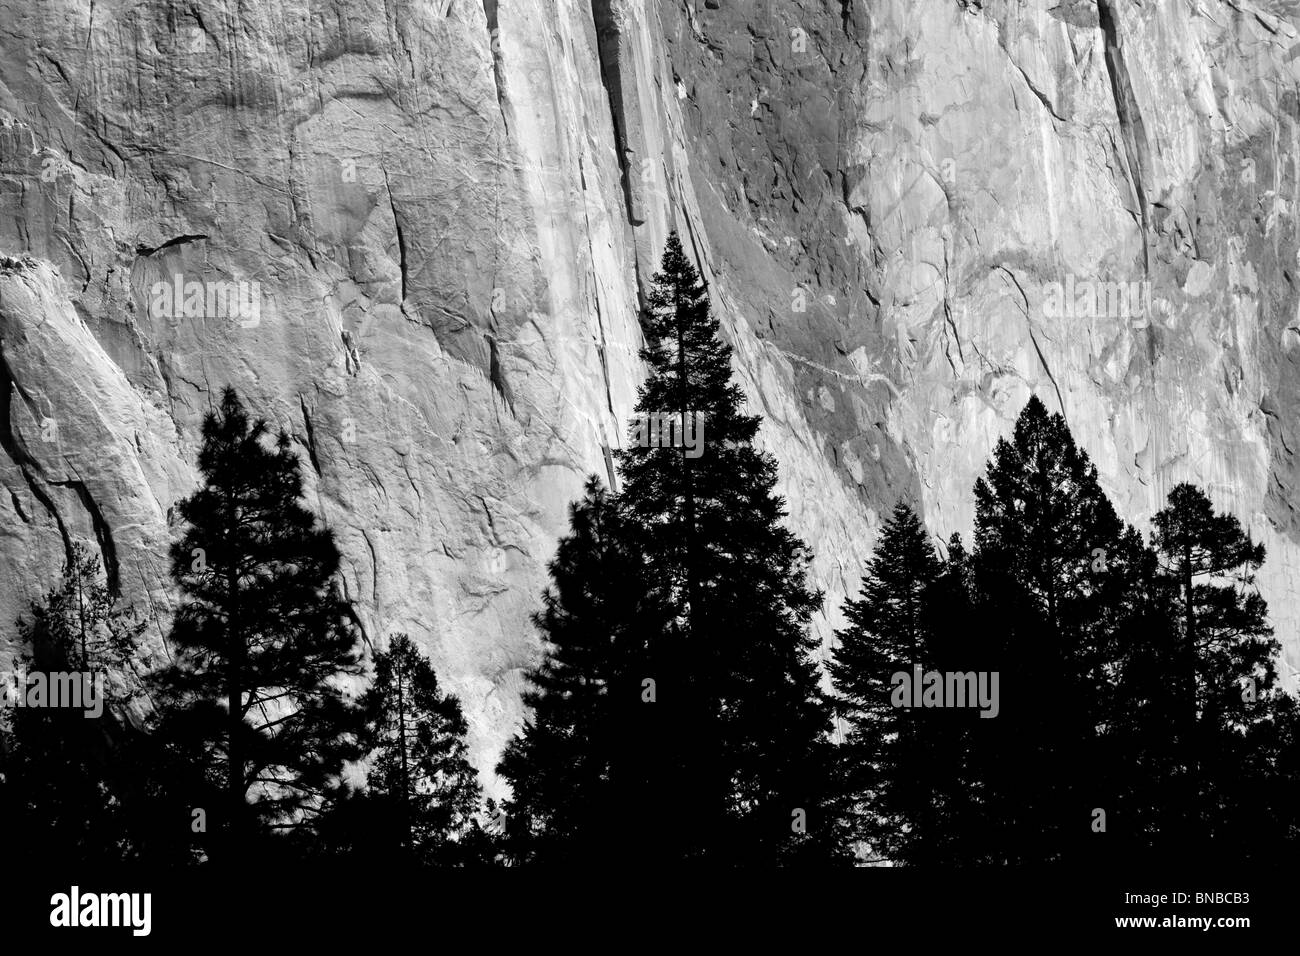 El Capitan with silhouetted trees. Yosemite National Park, California Stock Photo